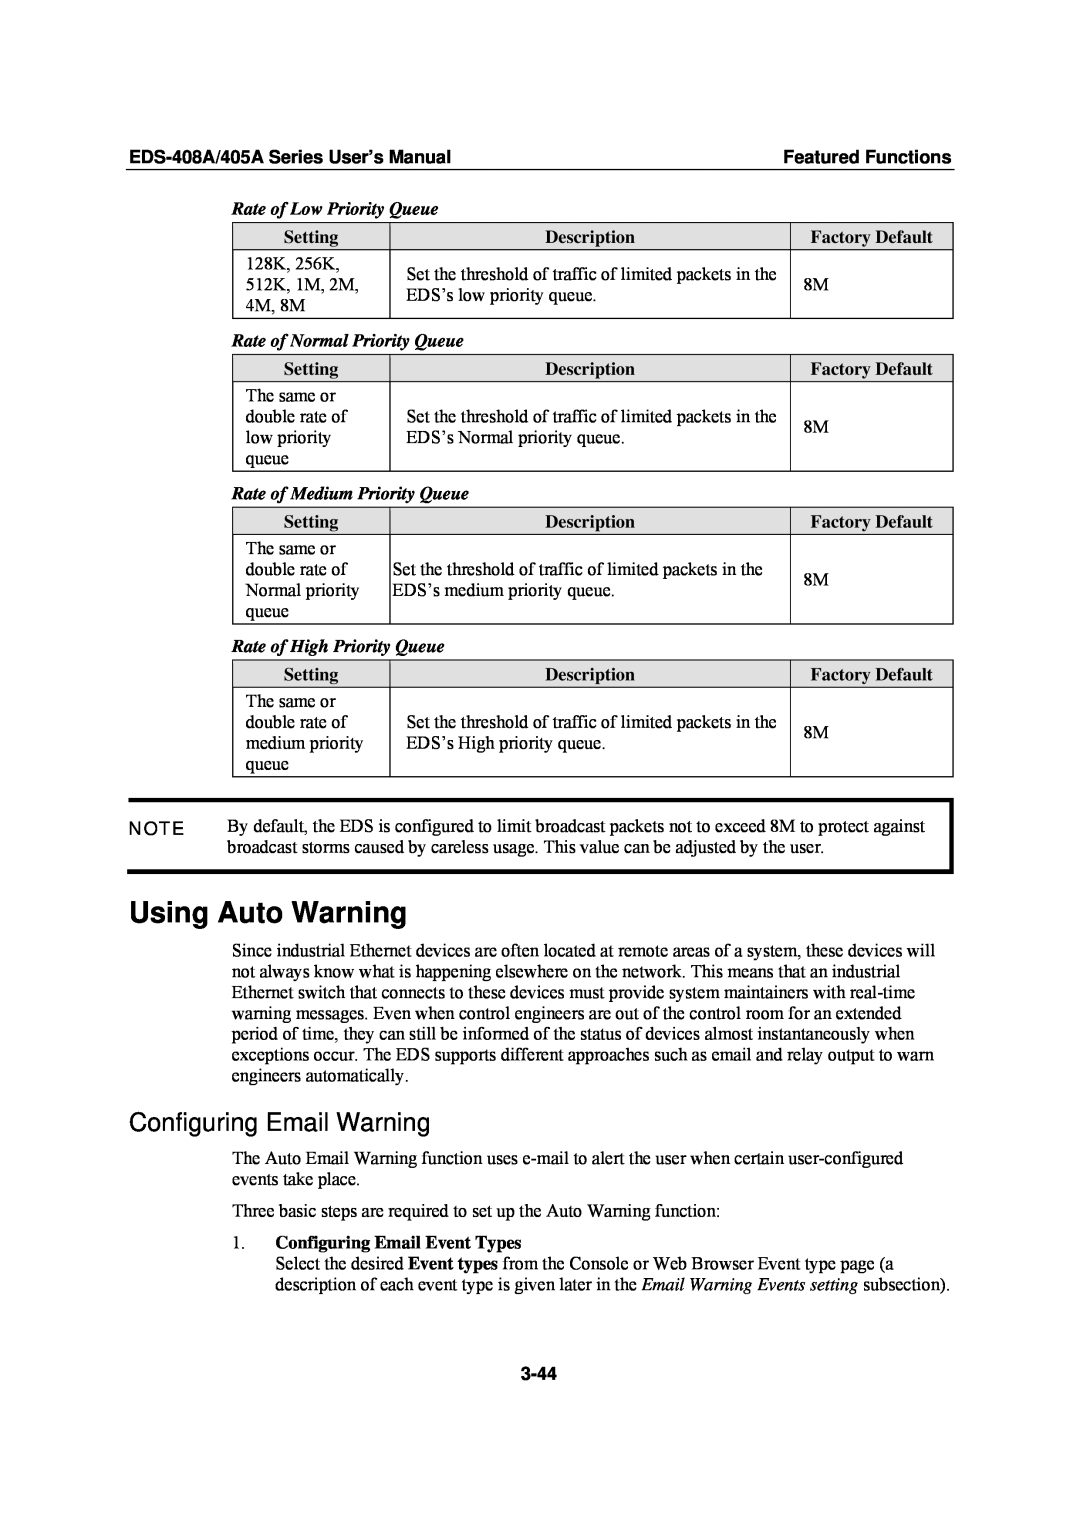 Moxa Technologies EDS-405A Using Auto Warning, Configuring Email Warning, Rate of Low Priority Queue, 3-44, Setting 